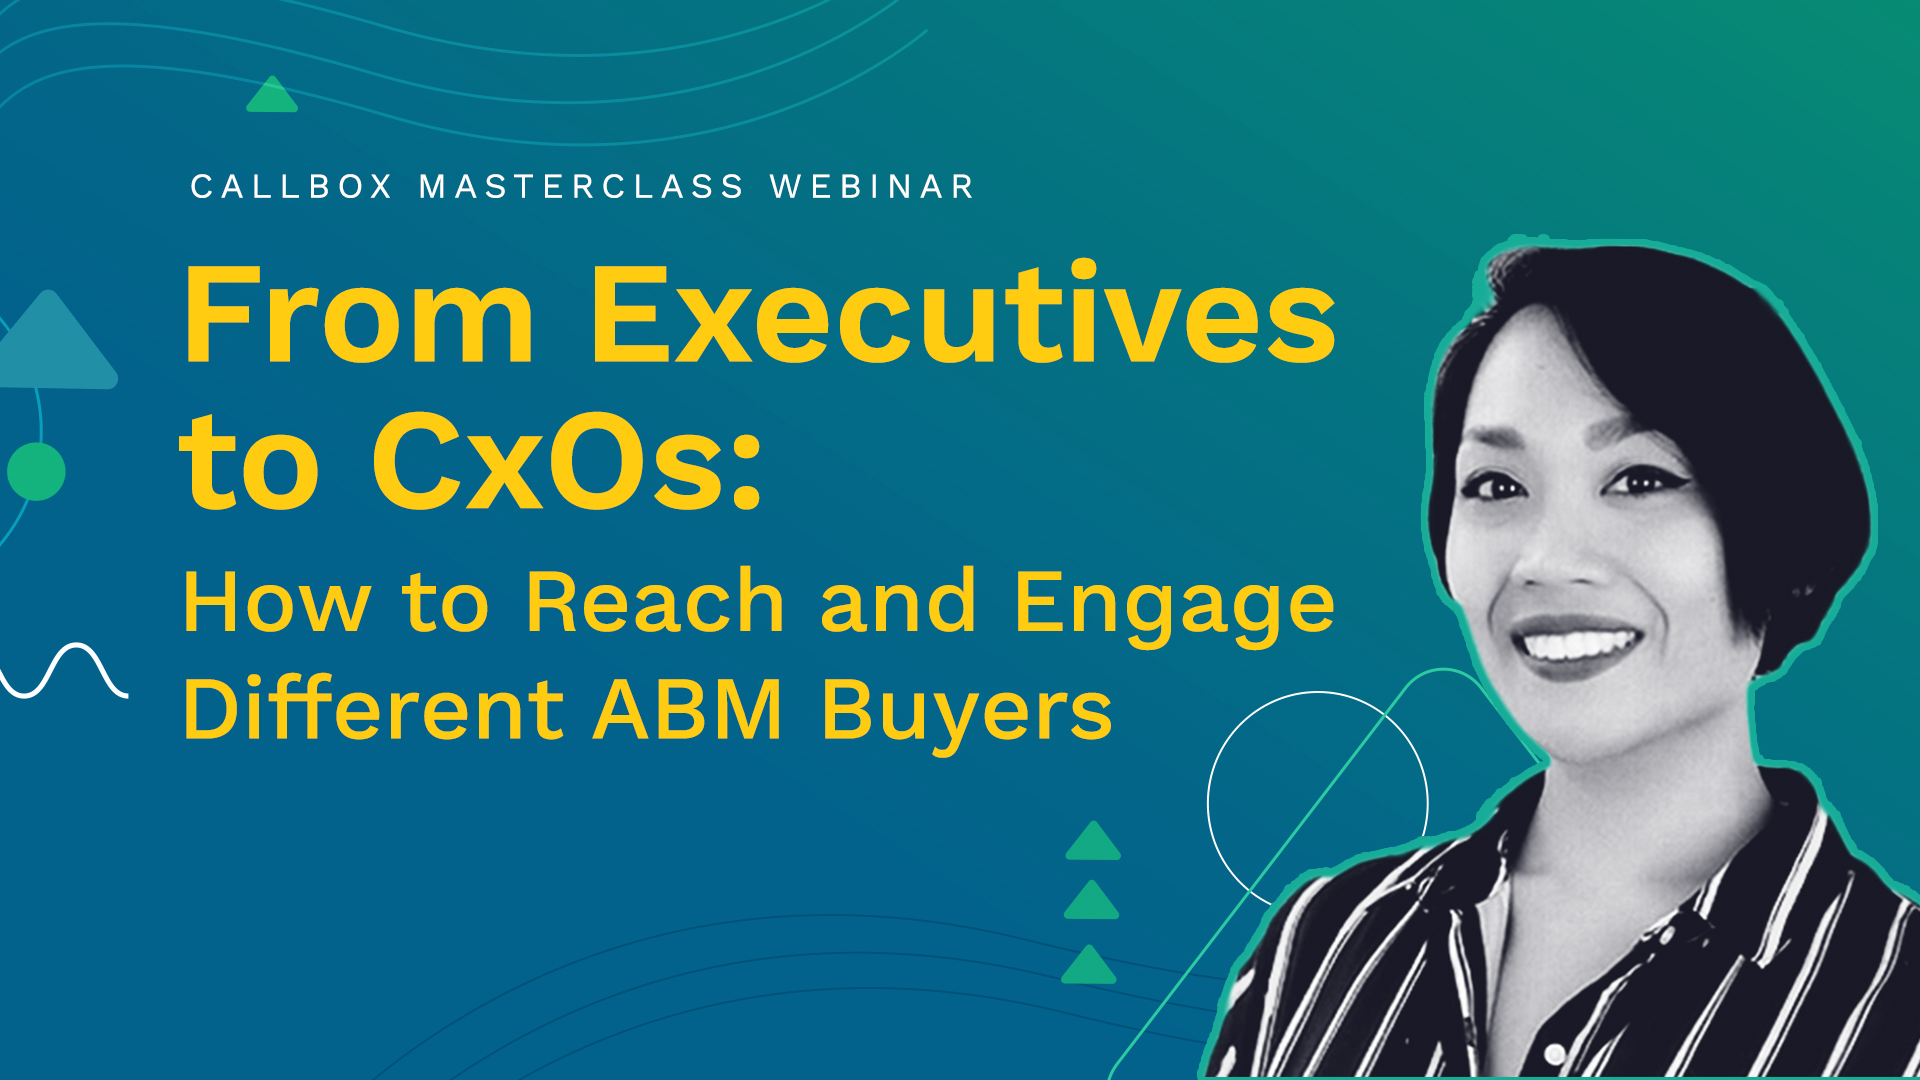 How to Reach and Engage Different ABM Buyers